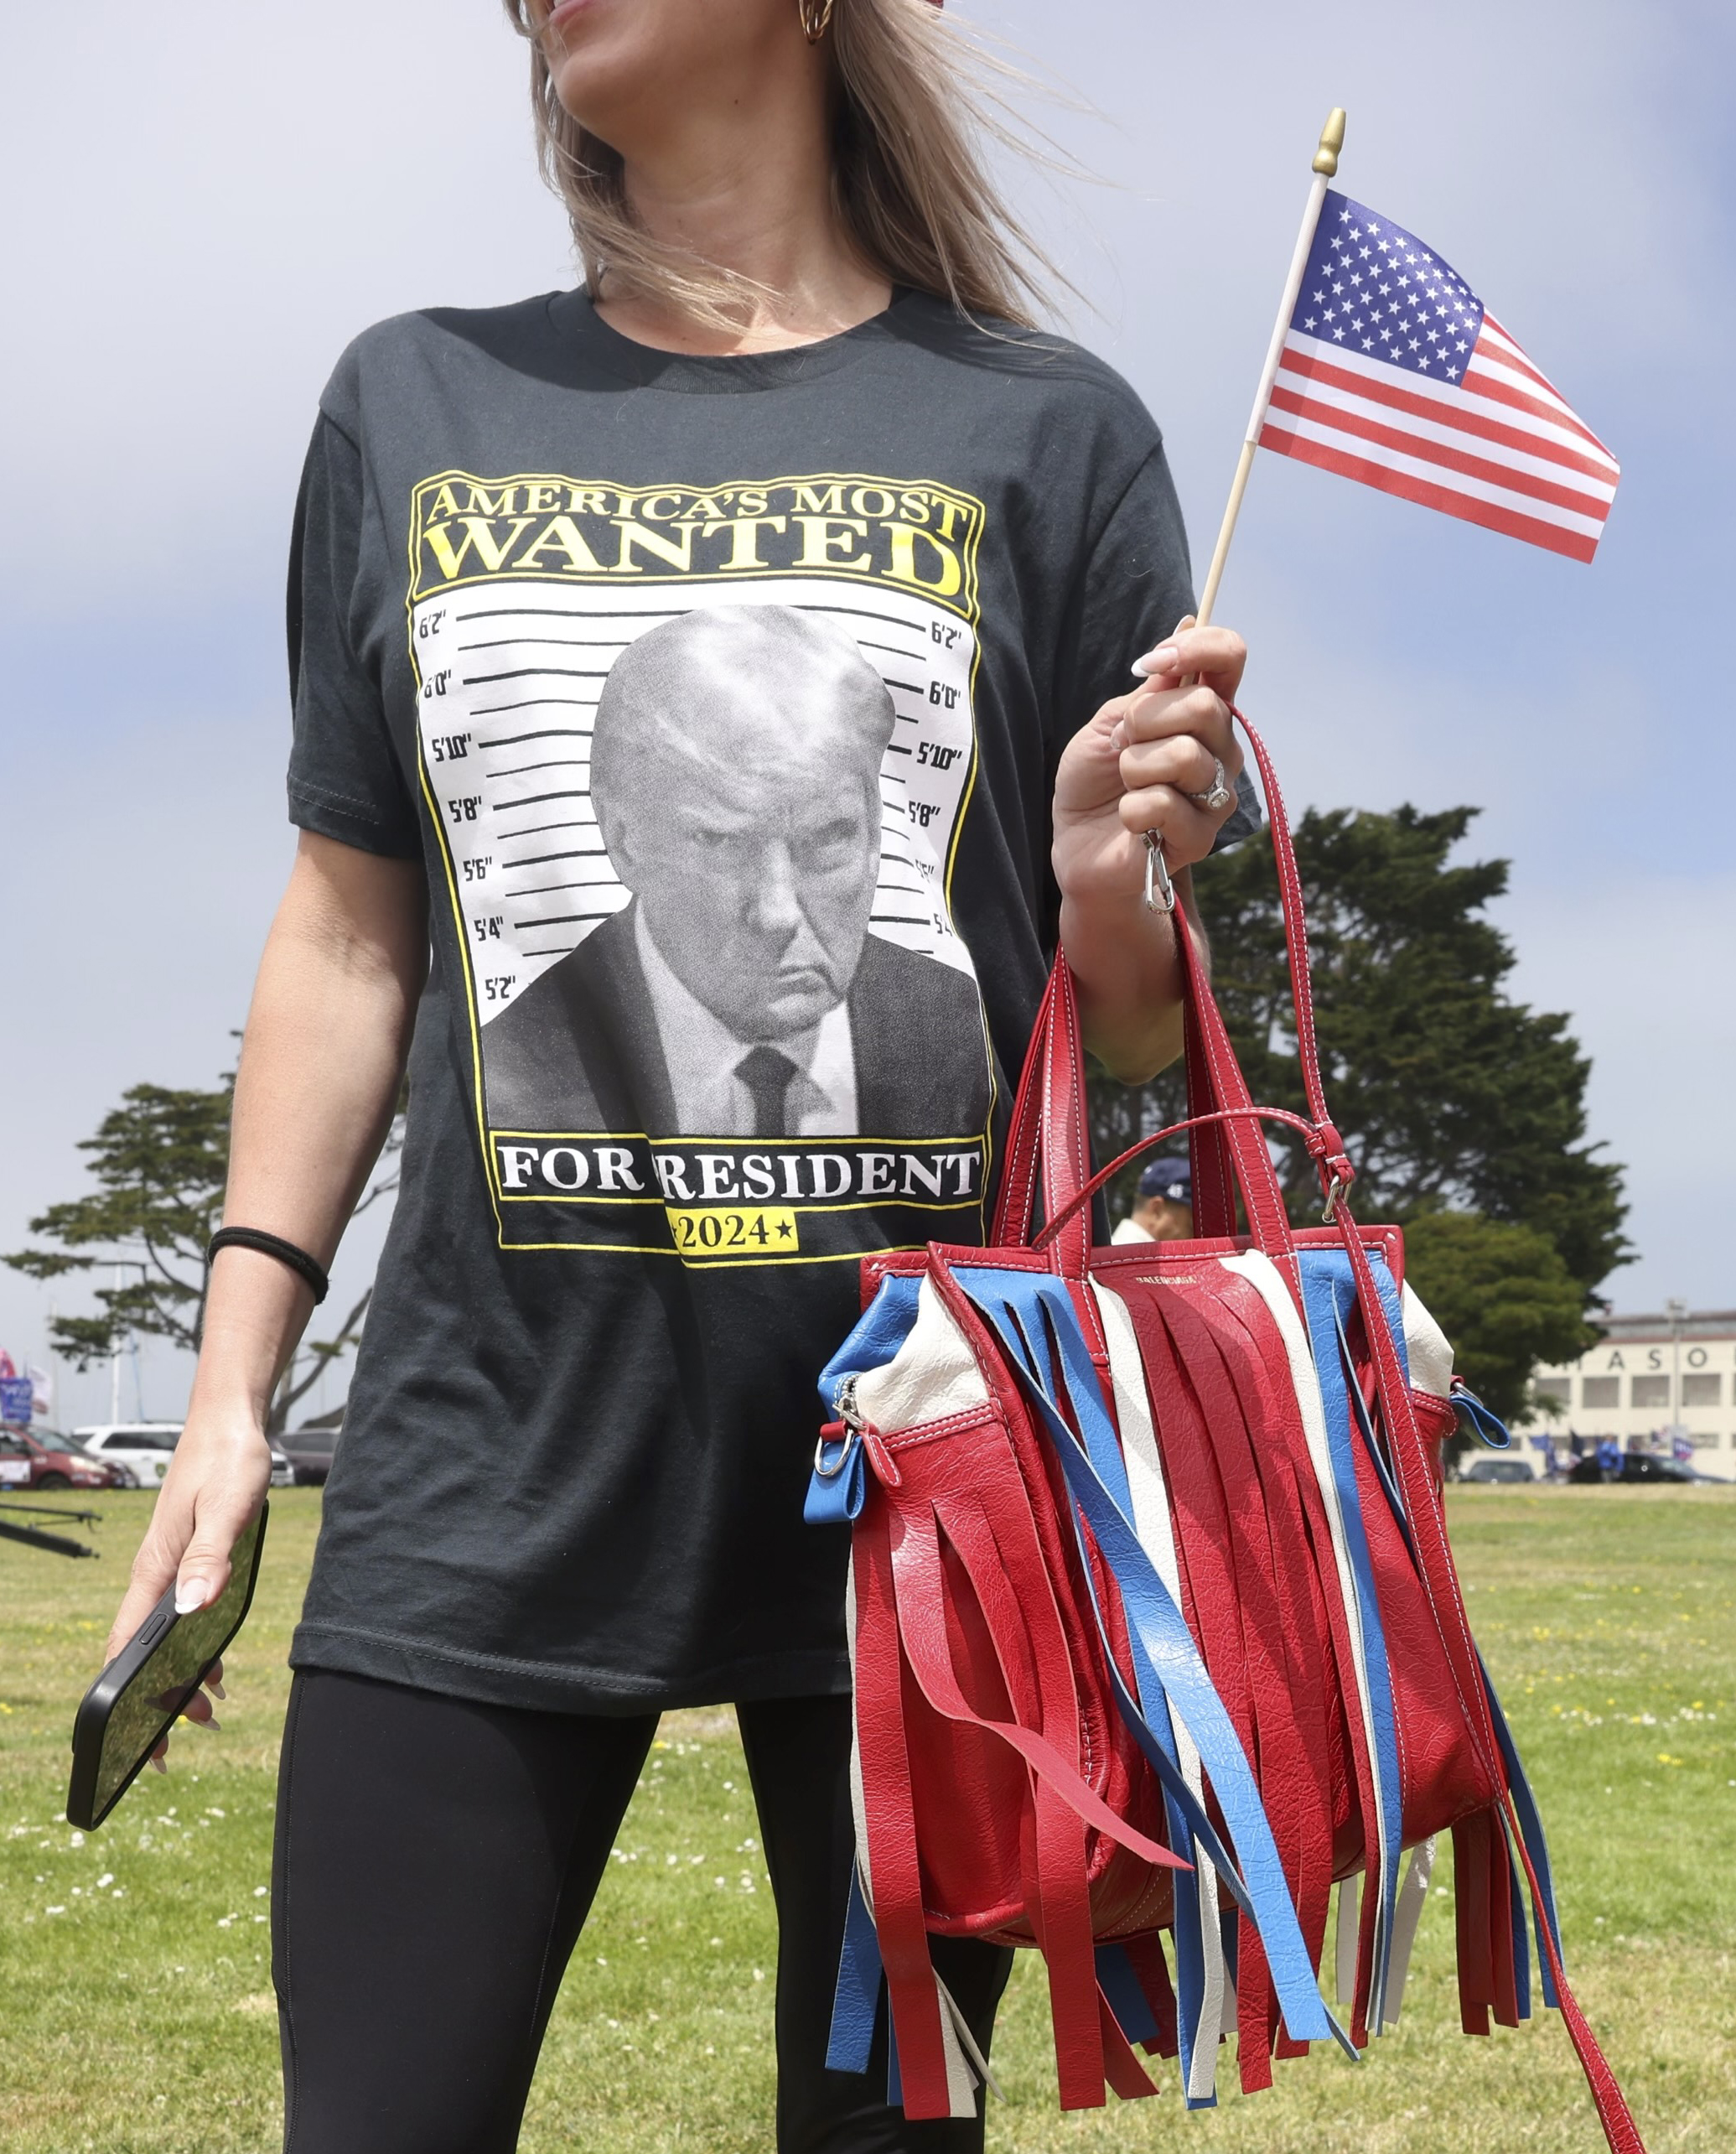 A woman wearing a black T-shirt with &quot;America's Most Wanted&quot; and an image of a man, holds a small American flag and a red fringed bag in a grassy outdoor setting.